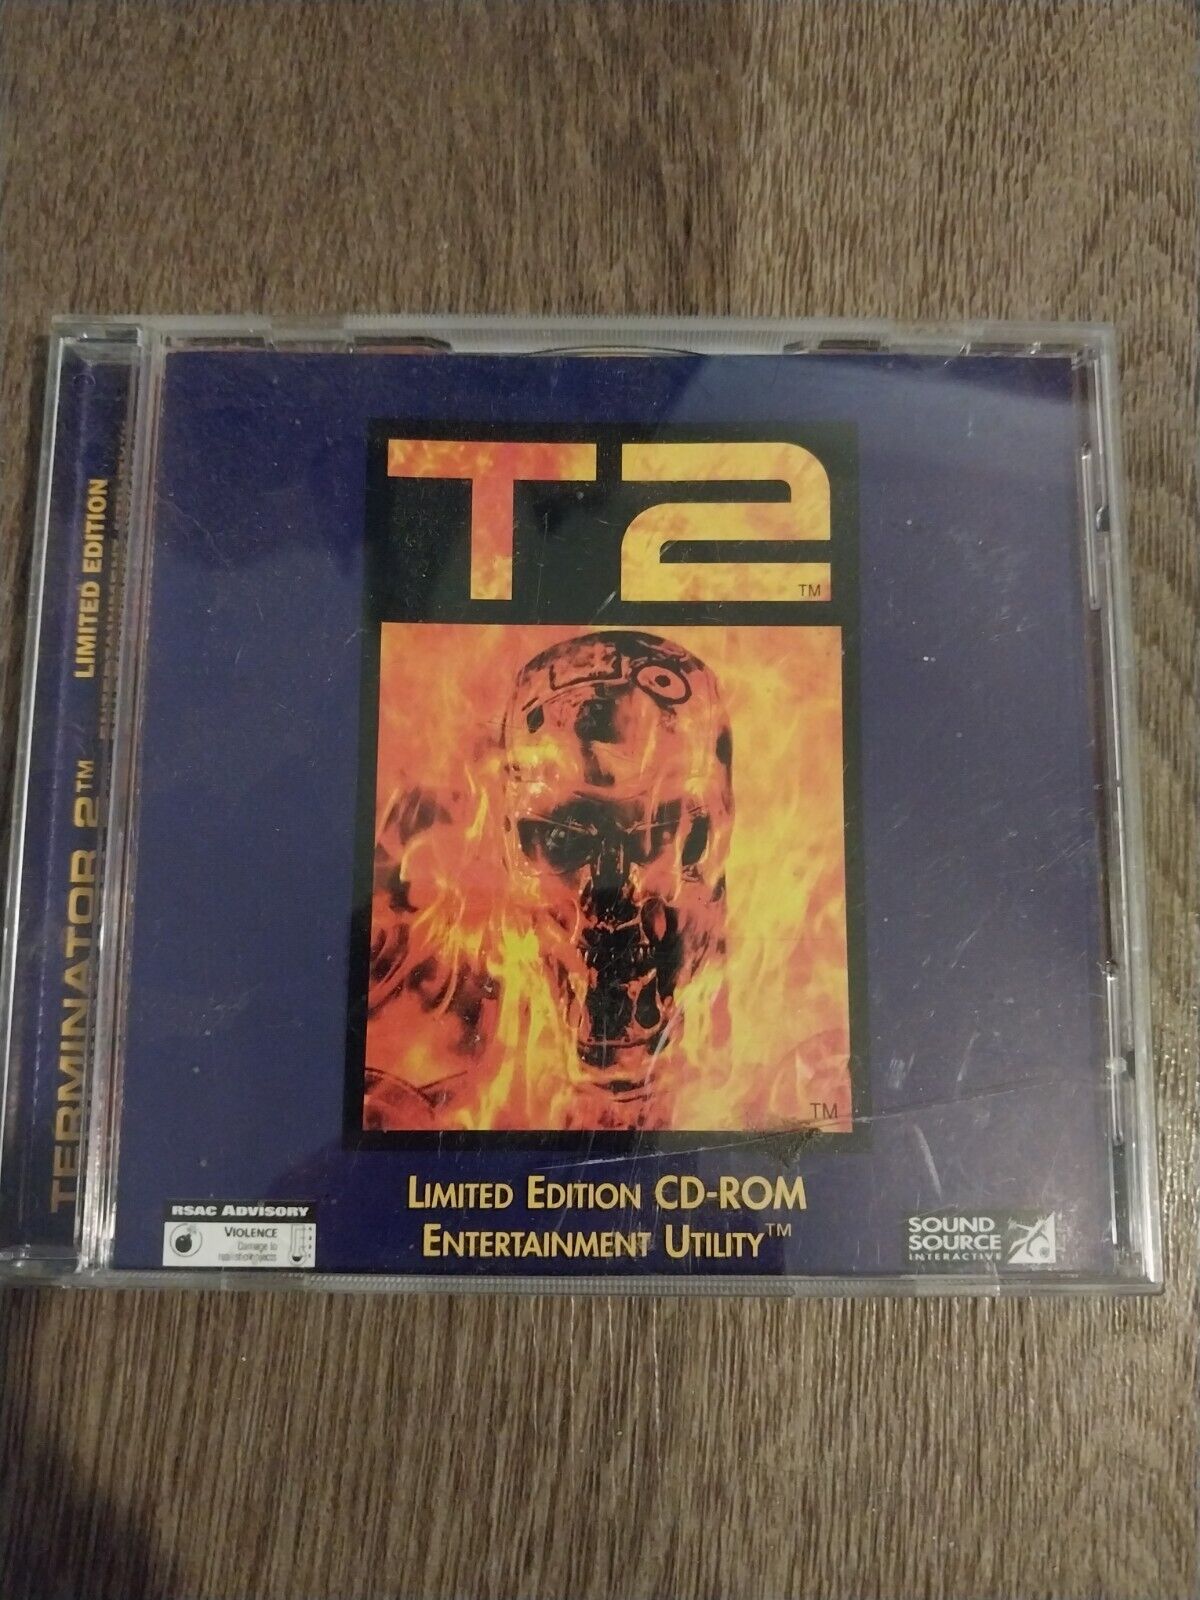 T2 Terminator 2 Limited Edition CD-ROM Entertainment Utility Windows 95 PC Game